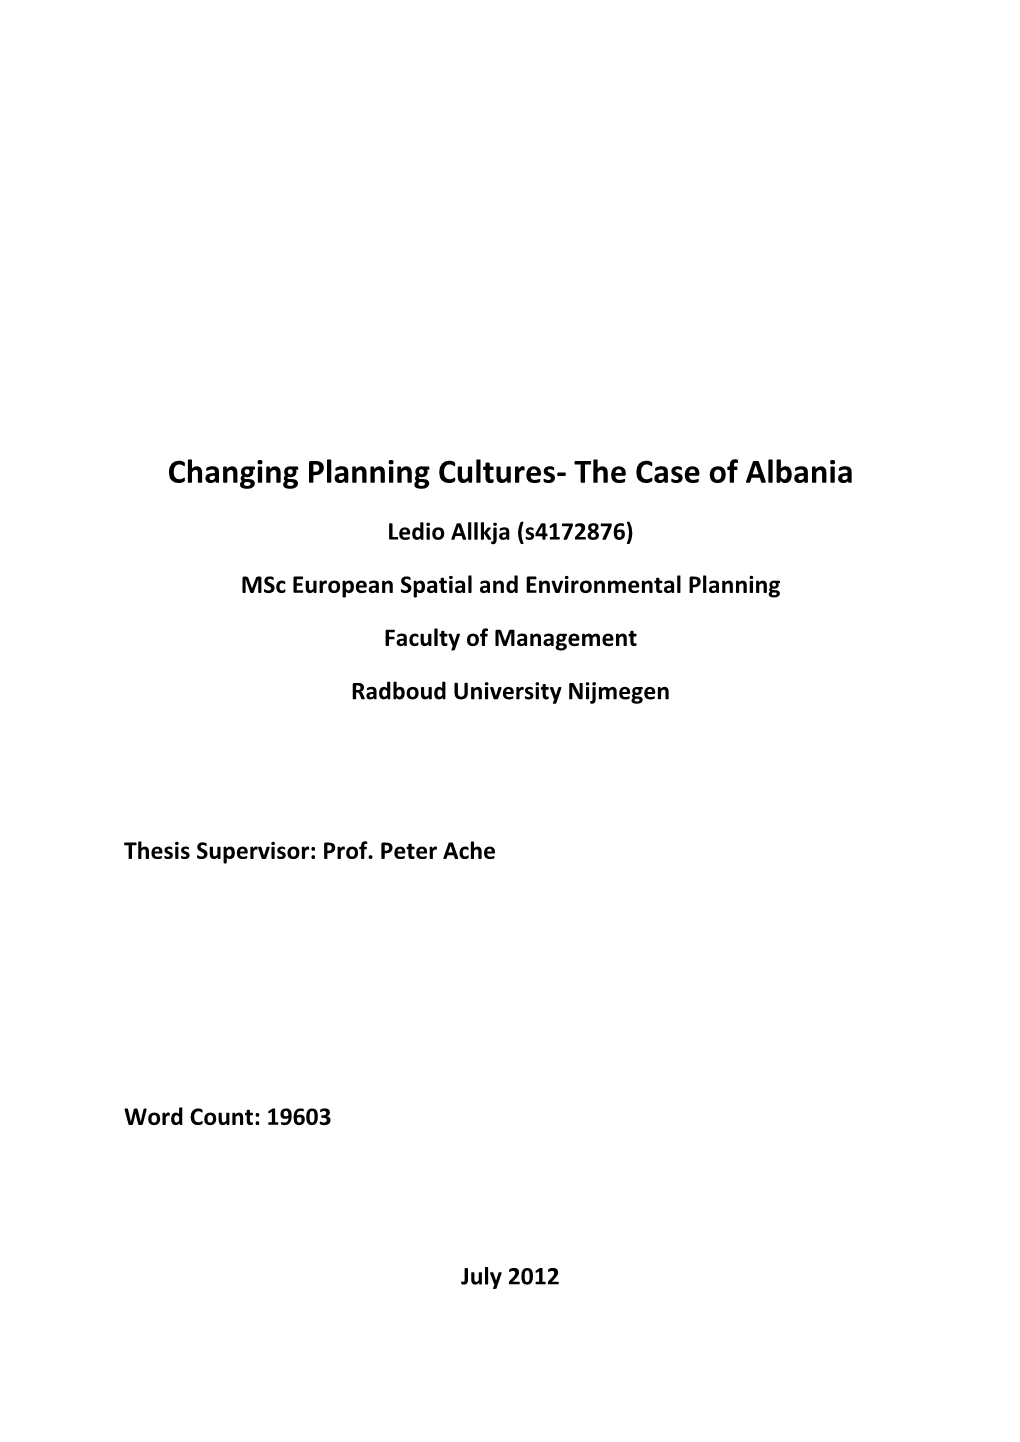 Changing Planning Cultures- the Case of Albania